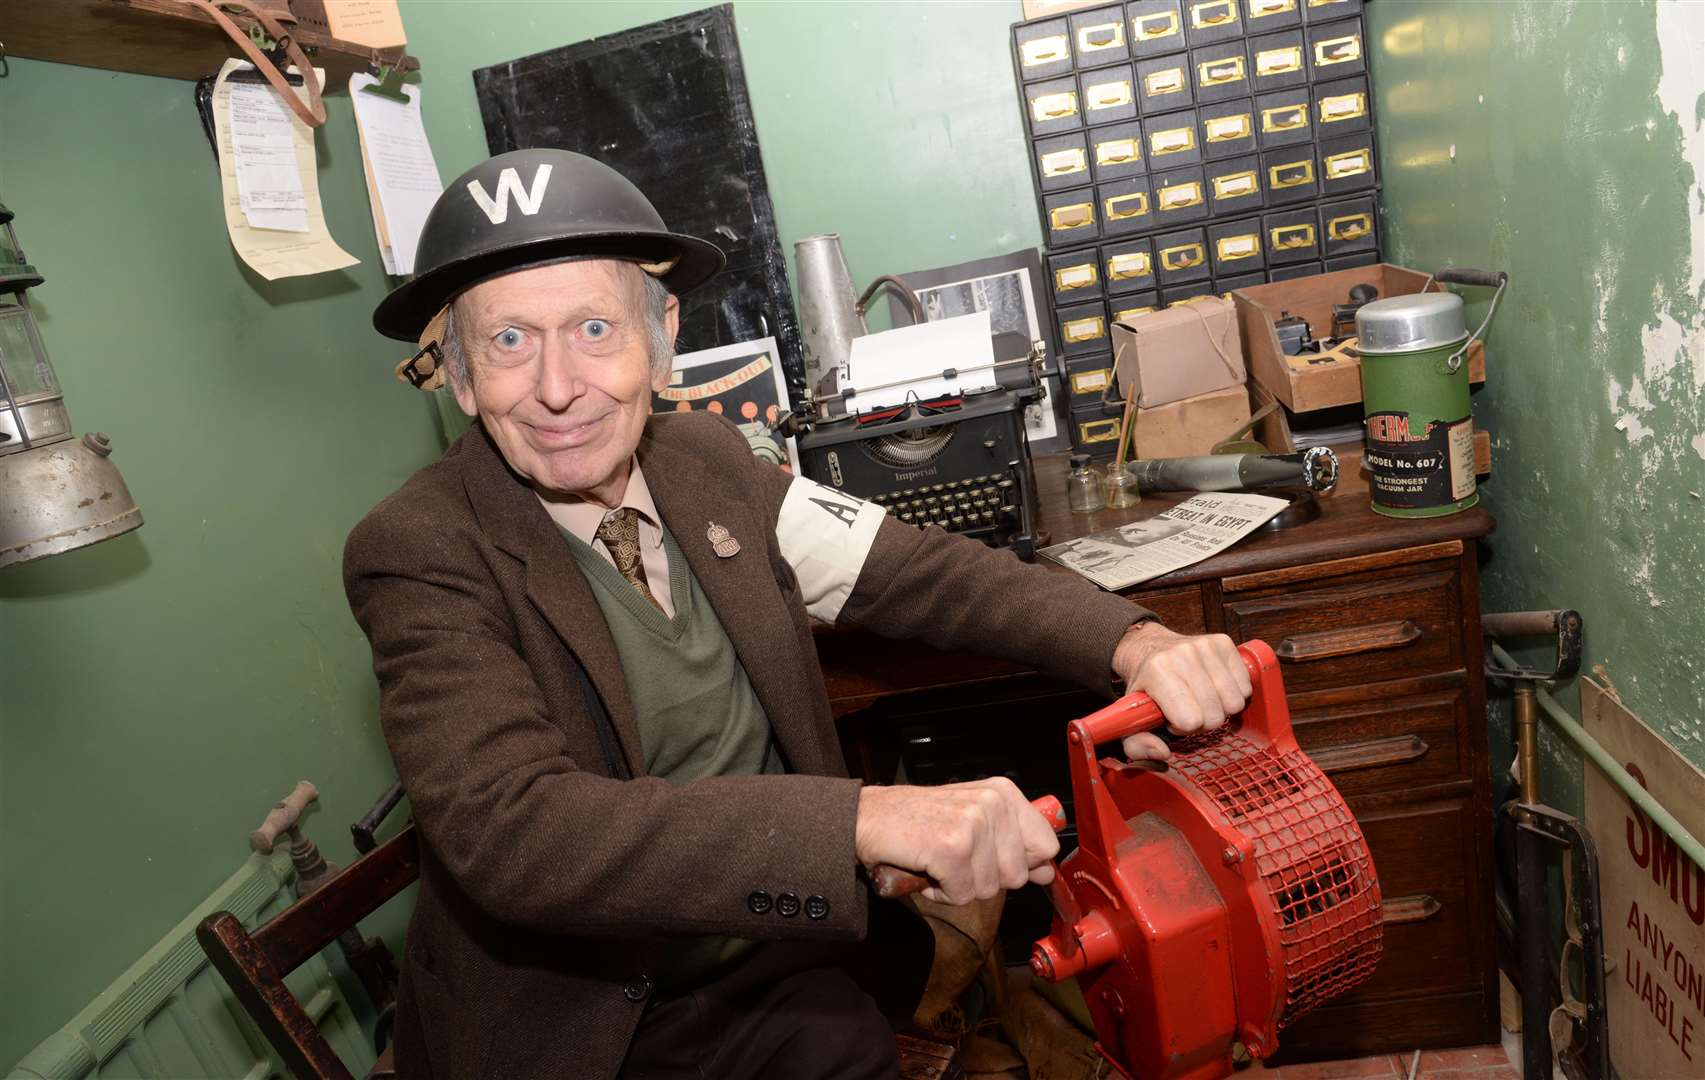 ARP warden David Hughes at an Empire Day exhibition at the Old Forge Wartime House in East Street, Sittingbourne. Picture: Chris Davey